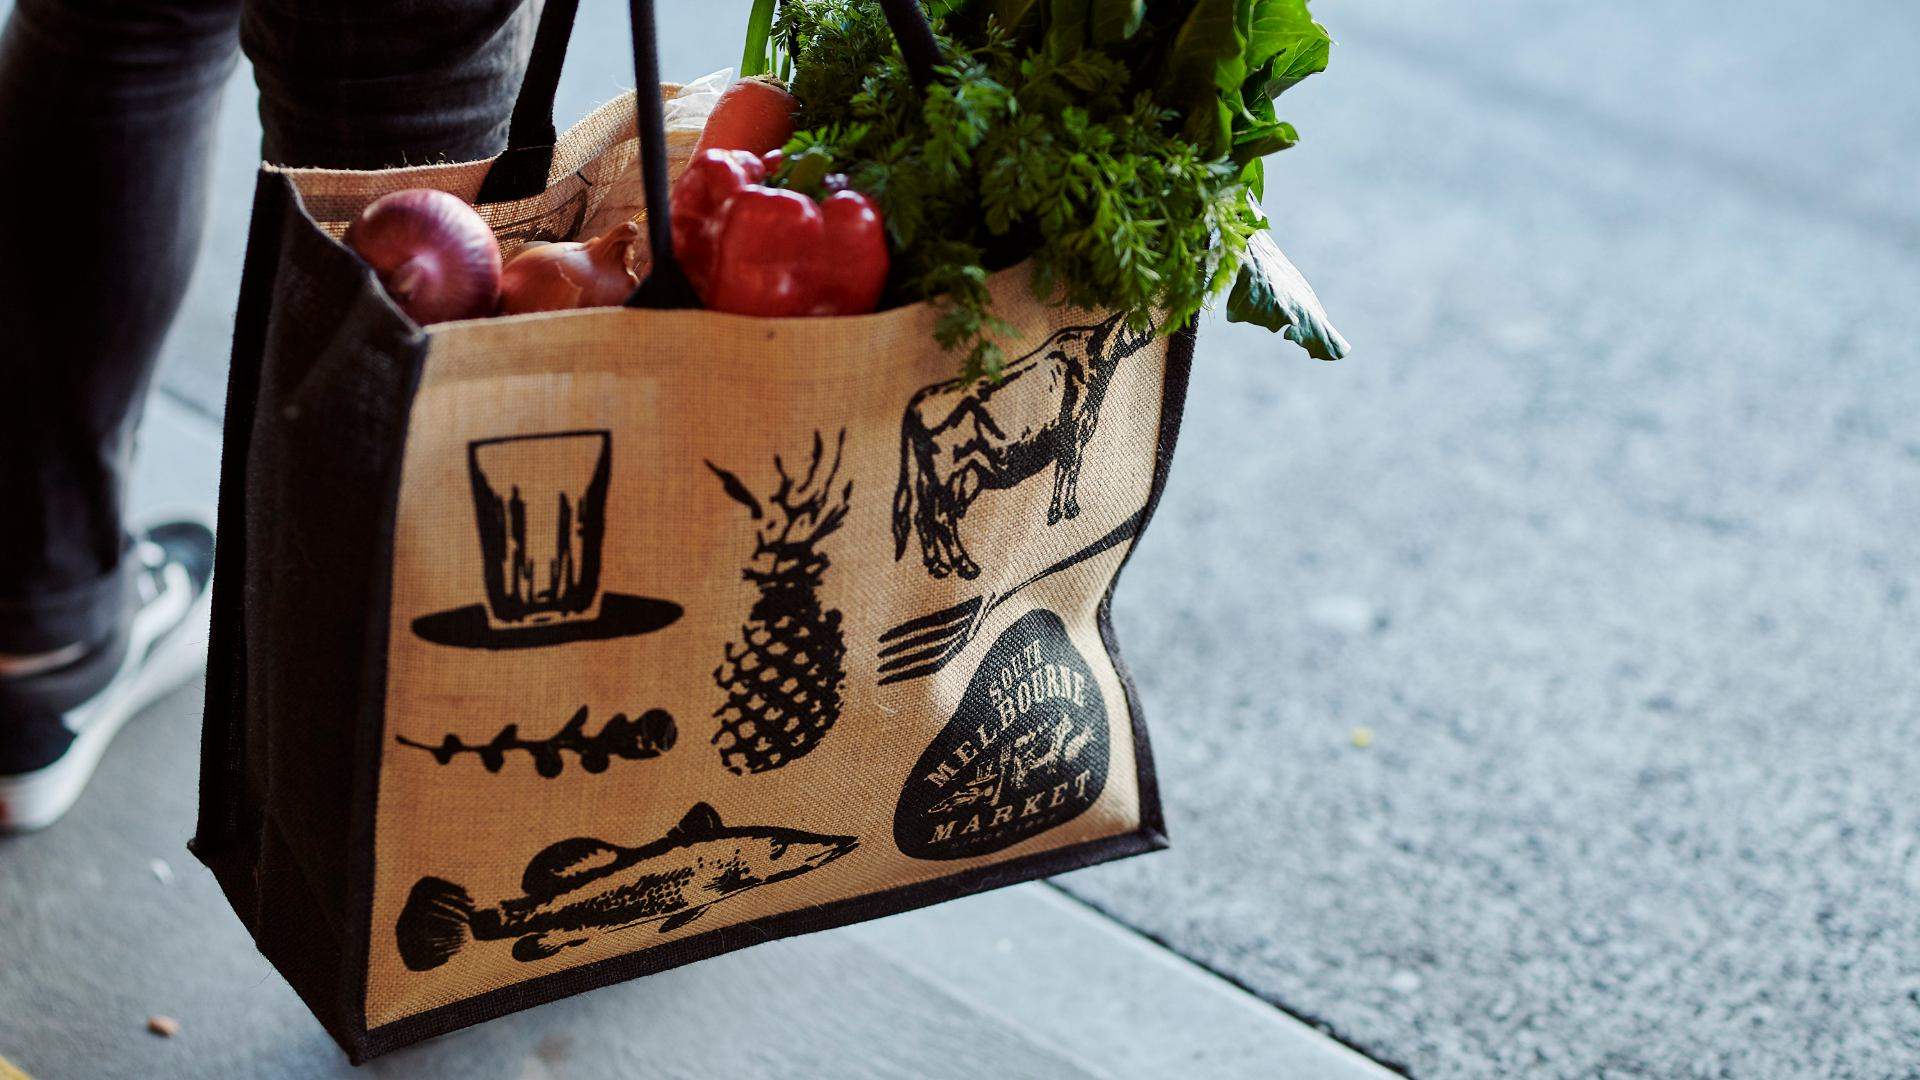 South Melbourne Market Has Launched a Drive-Thru Grocery Pick-Up Point